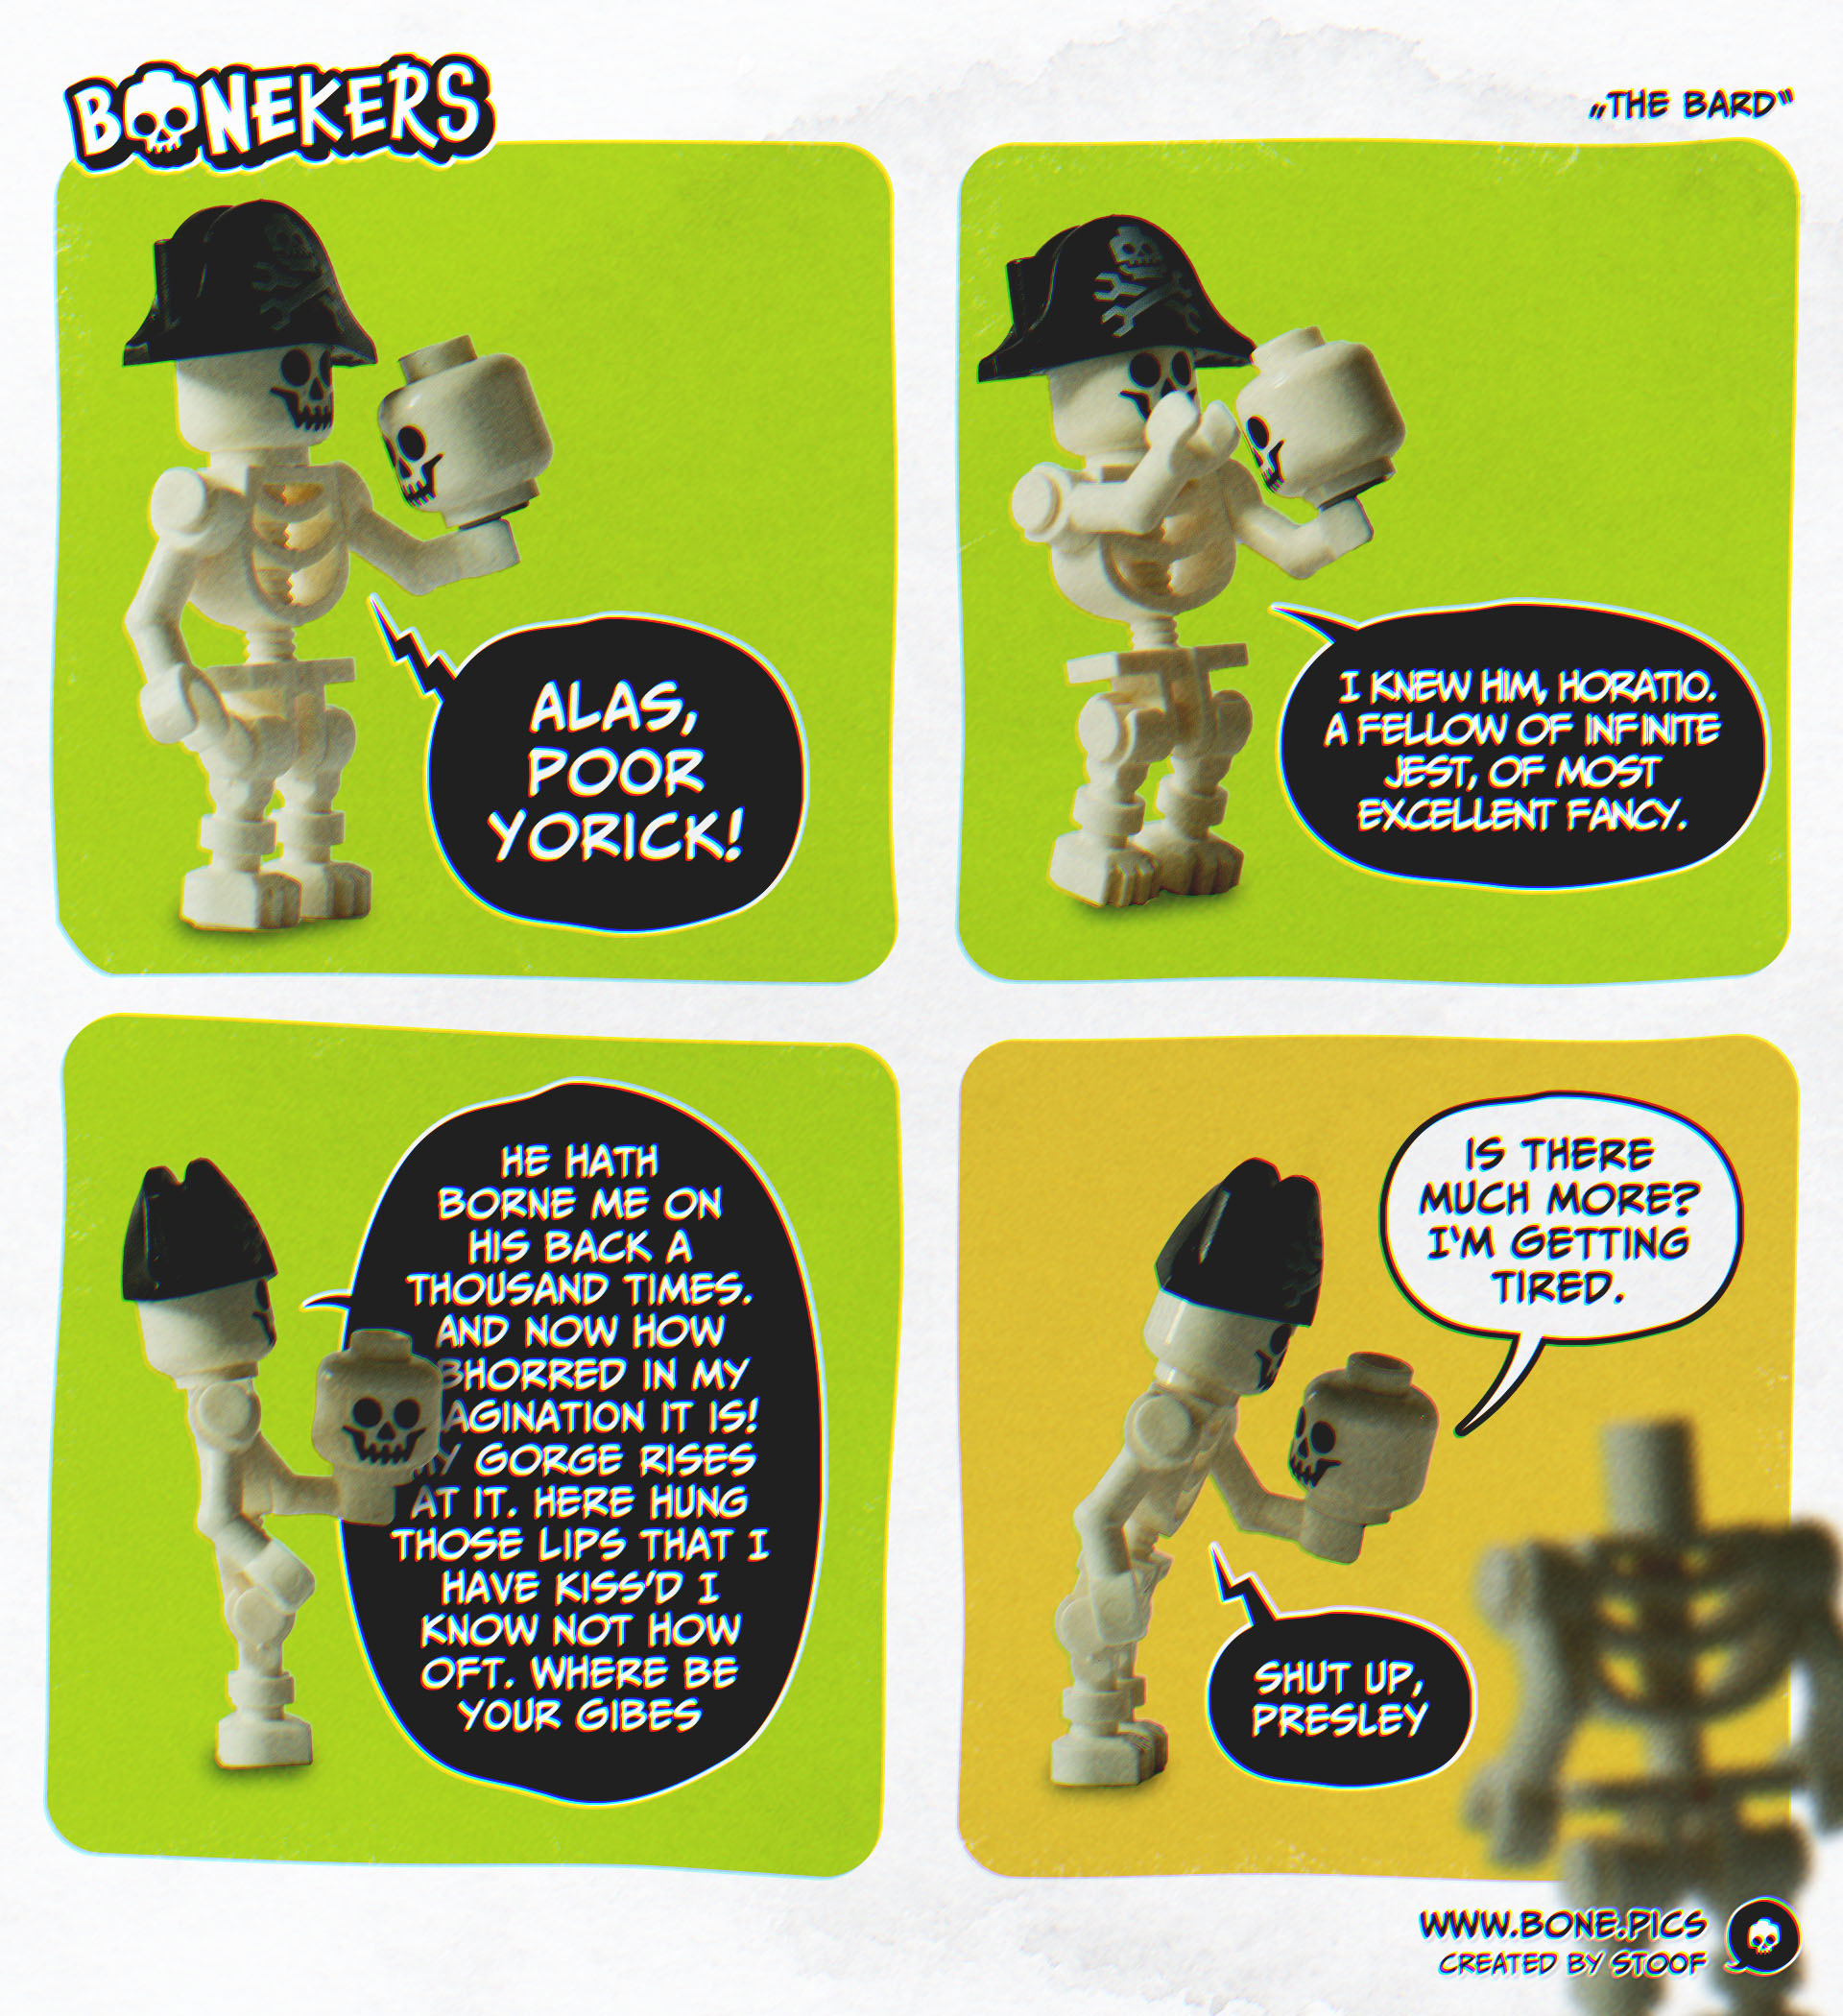 A four-panel comic titled "Bonekers" features a Lego skeleton character dressed as a pirate. In the first panel, the skeleton holds a smaller skull and says, "Alas, poor Yorick!" The second panel shows the skeleton looking at the skull saying, "I knew him, Horatio, a fellow of infinite jest, of most excellent fancy." In the third panel, the skeleton gazes at the skull from a different angle and dramatically recites, "He hath borne me on his back a thousand times, and now how abhorred in my imagination it is! My gorge rises at it. Here hung those lips that I have kiss'd I know not how oft. Where be your gibes." In the final panel, the skull interrupts while his headless body appears off screen, saying, "Is there much more? I'm getting tired," to which the skeleton retorts, "Shut up, Presley.